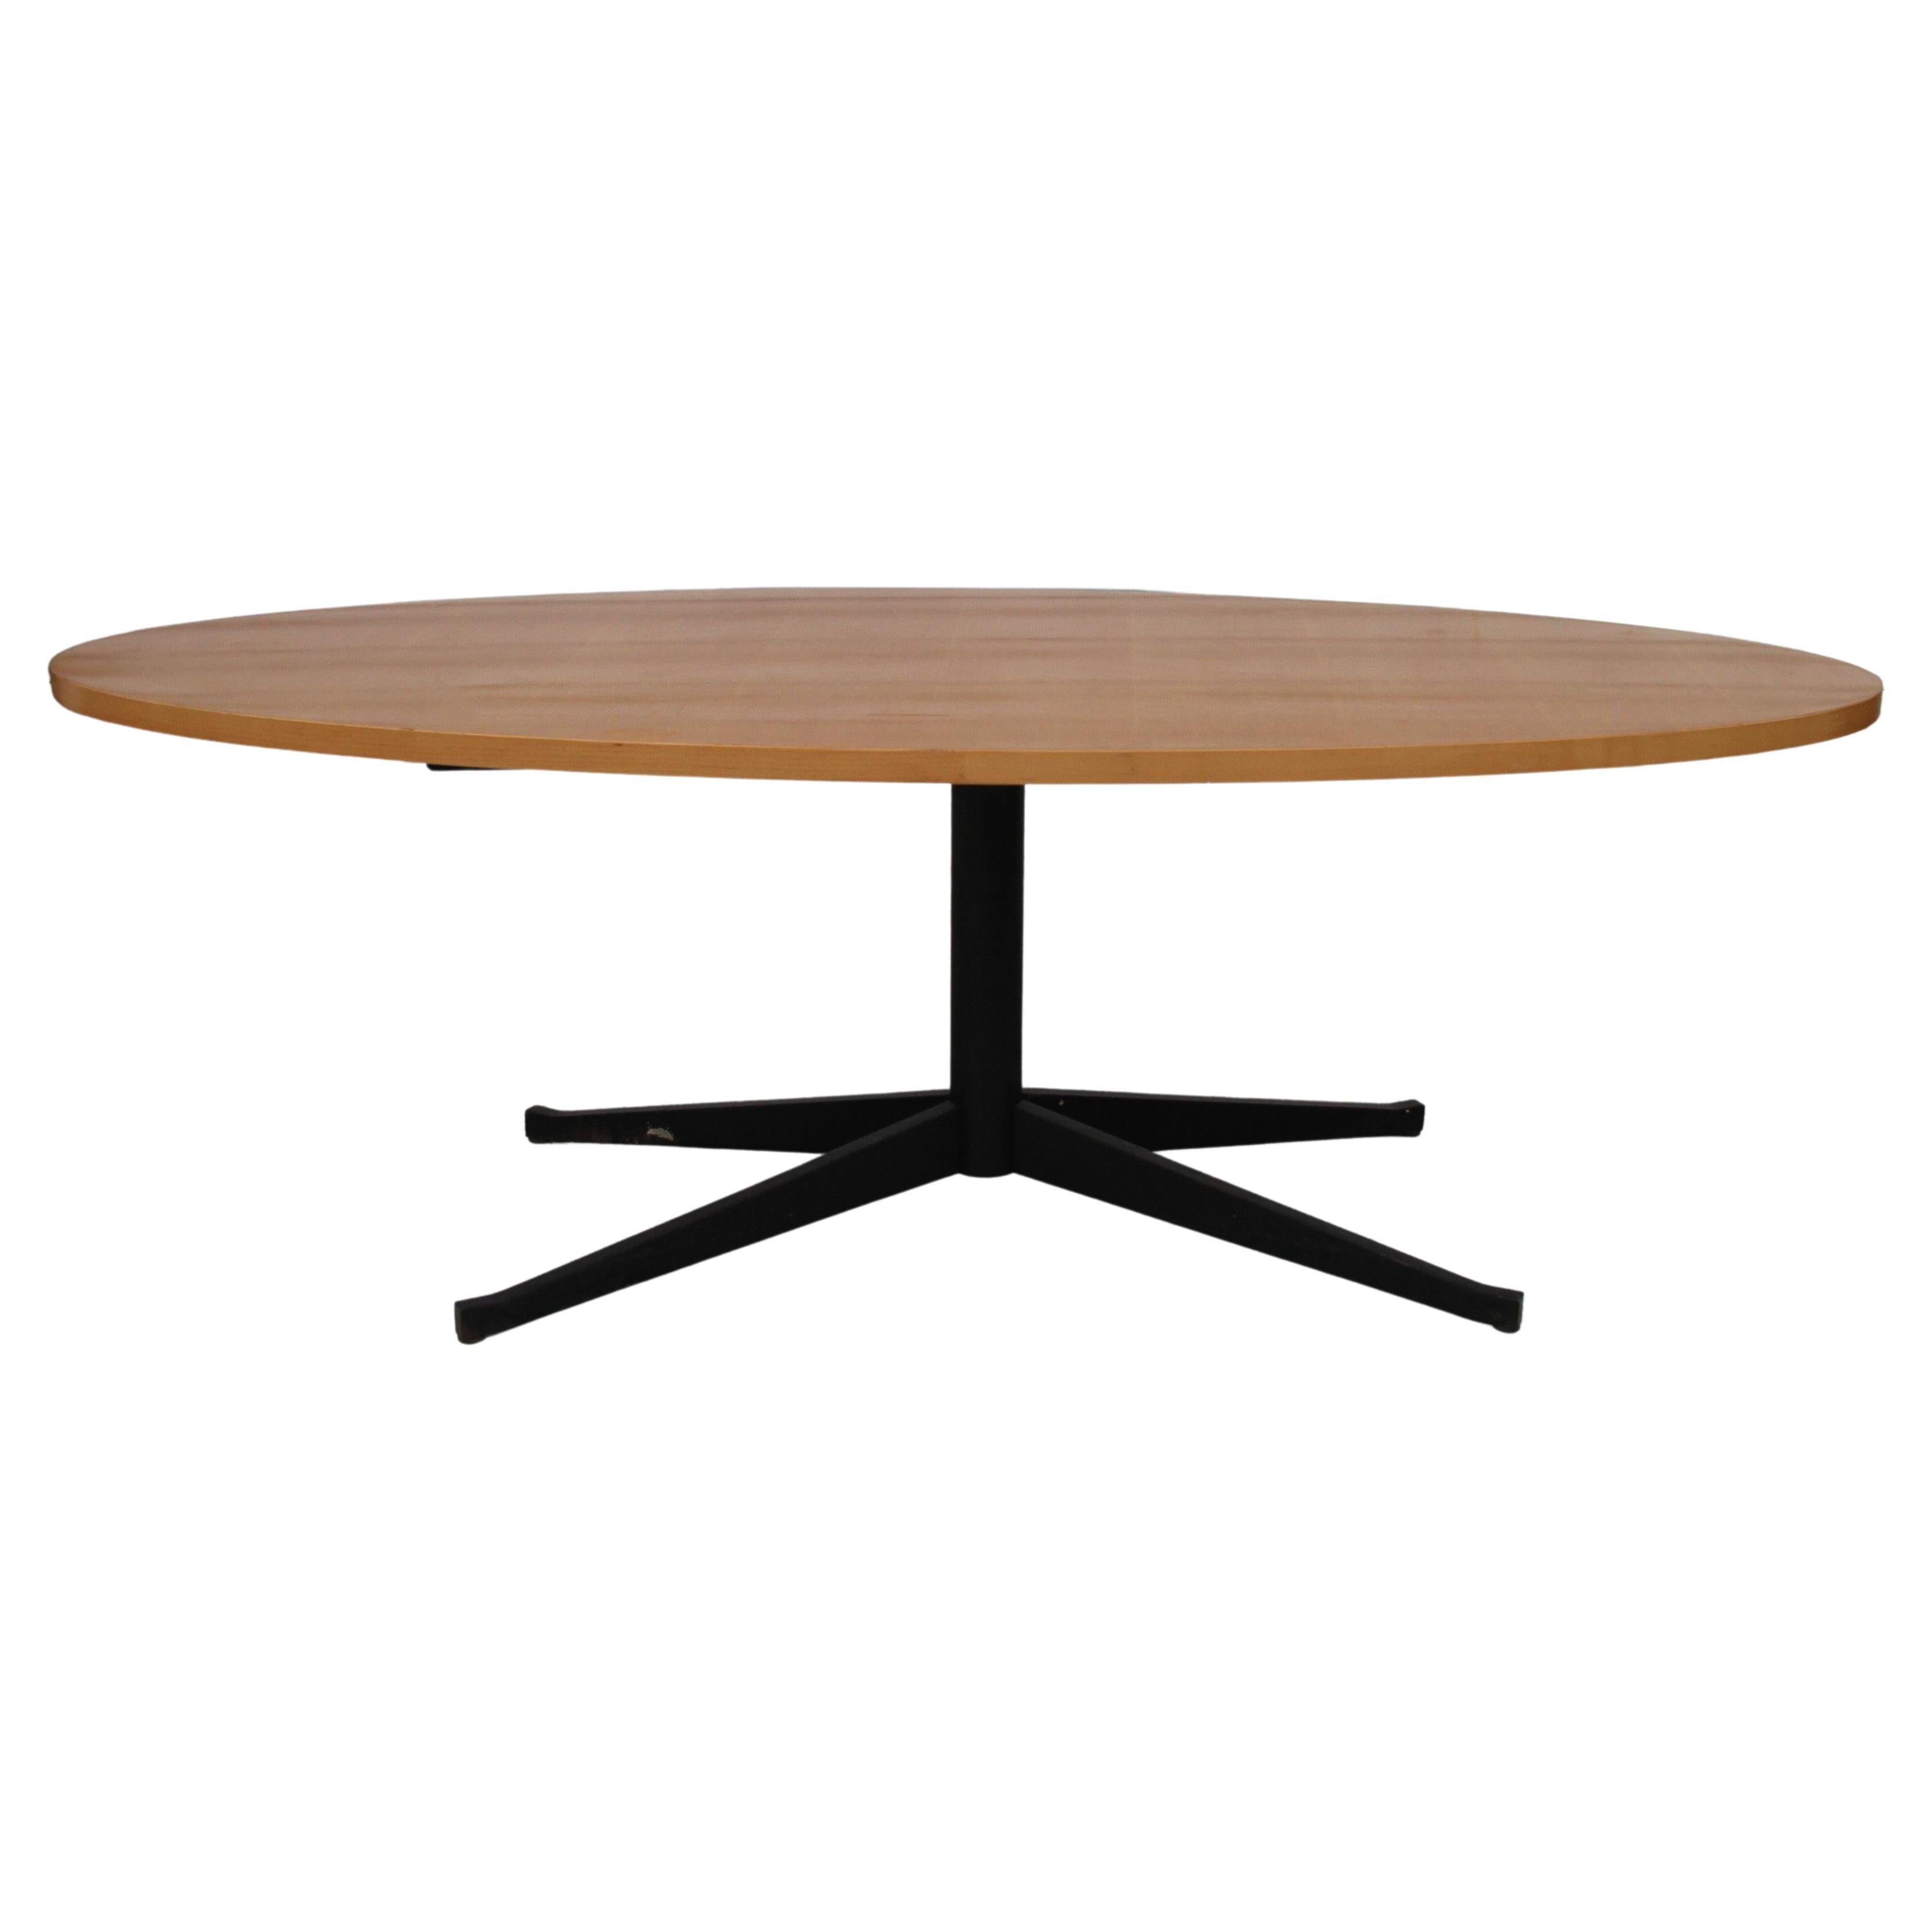 7' Maple Steelcase Dining Conference Table For Sale